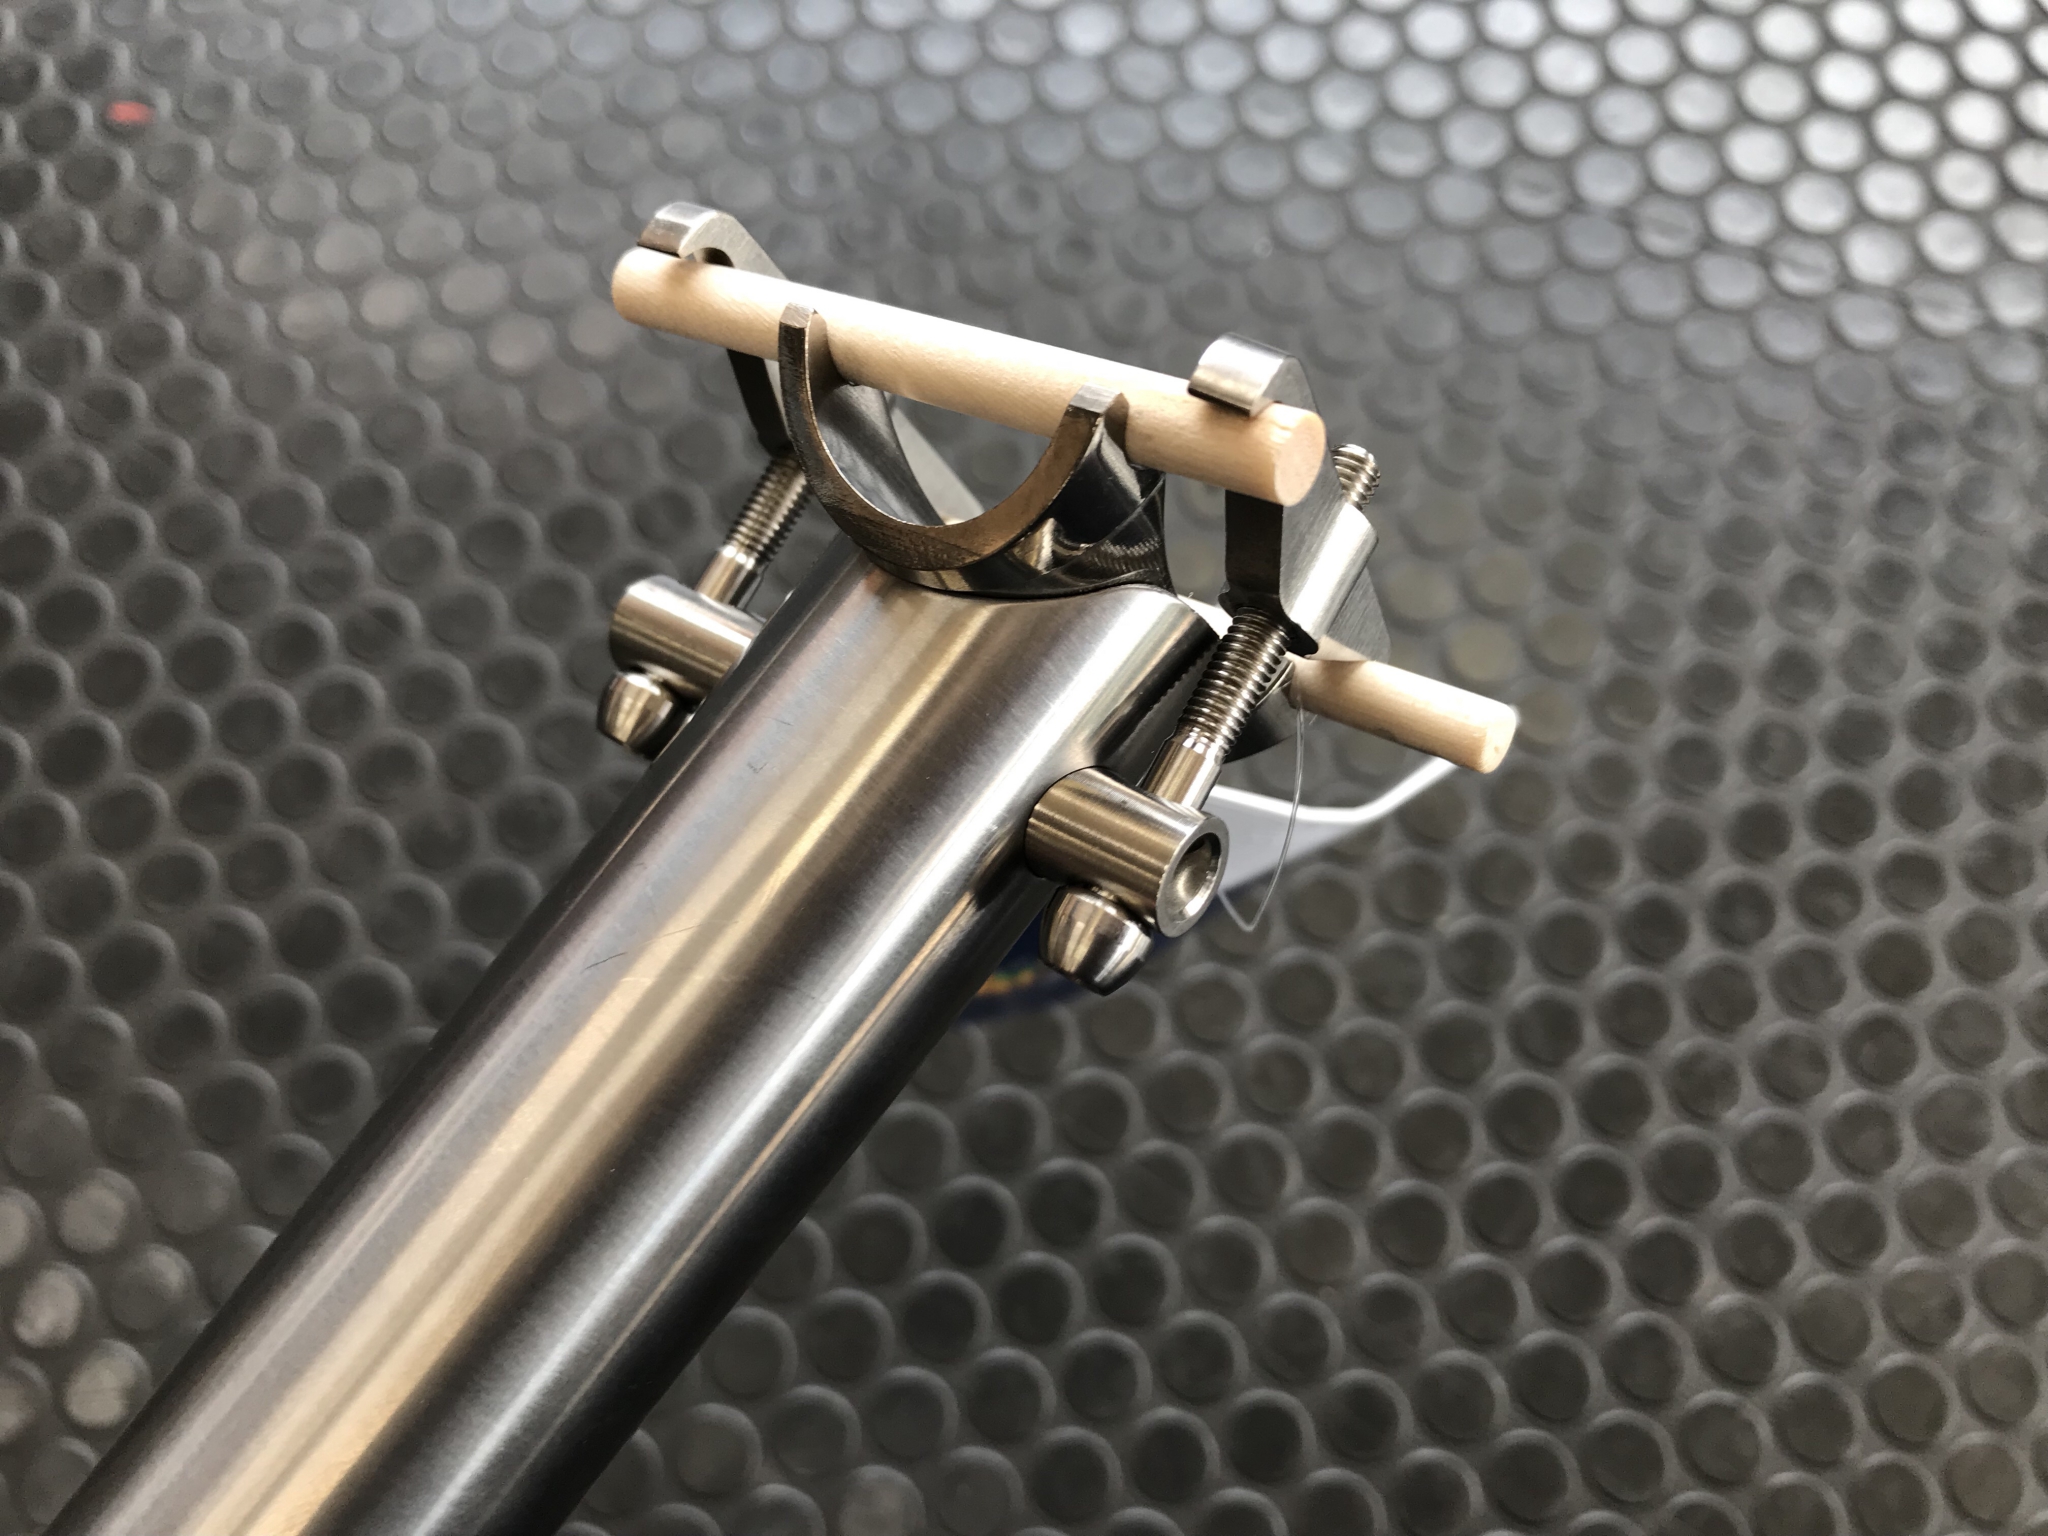 FFR TITAN SEATPOST 取り付けしました！ – cyclemark サイクルマーク